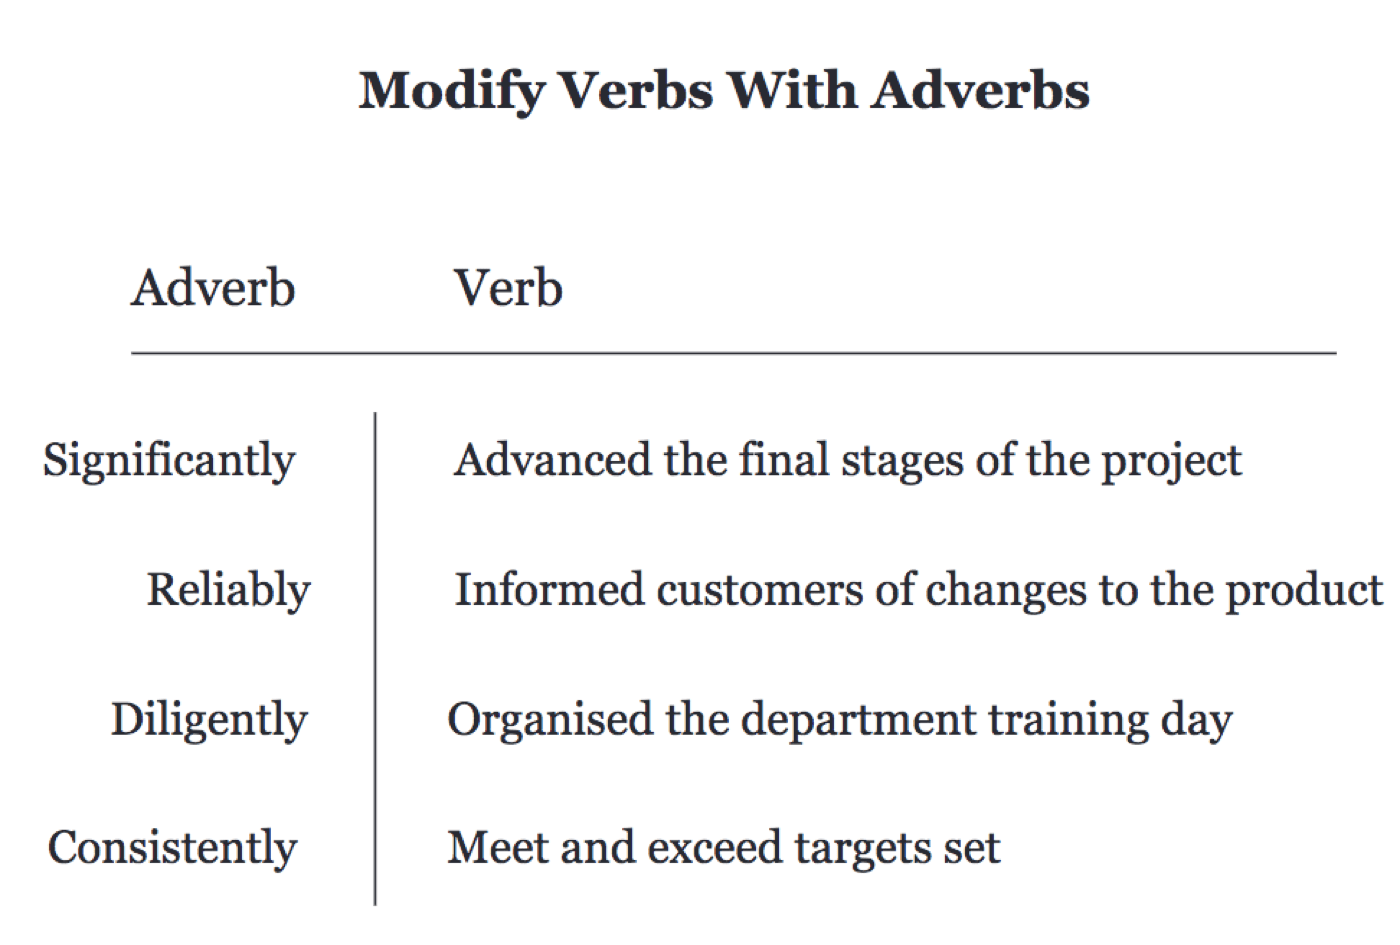 examples of modifying verbs with your adverbs on your CV